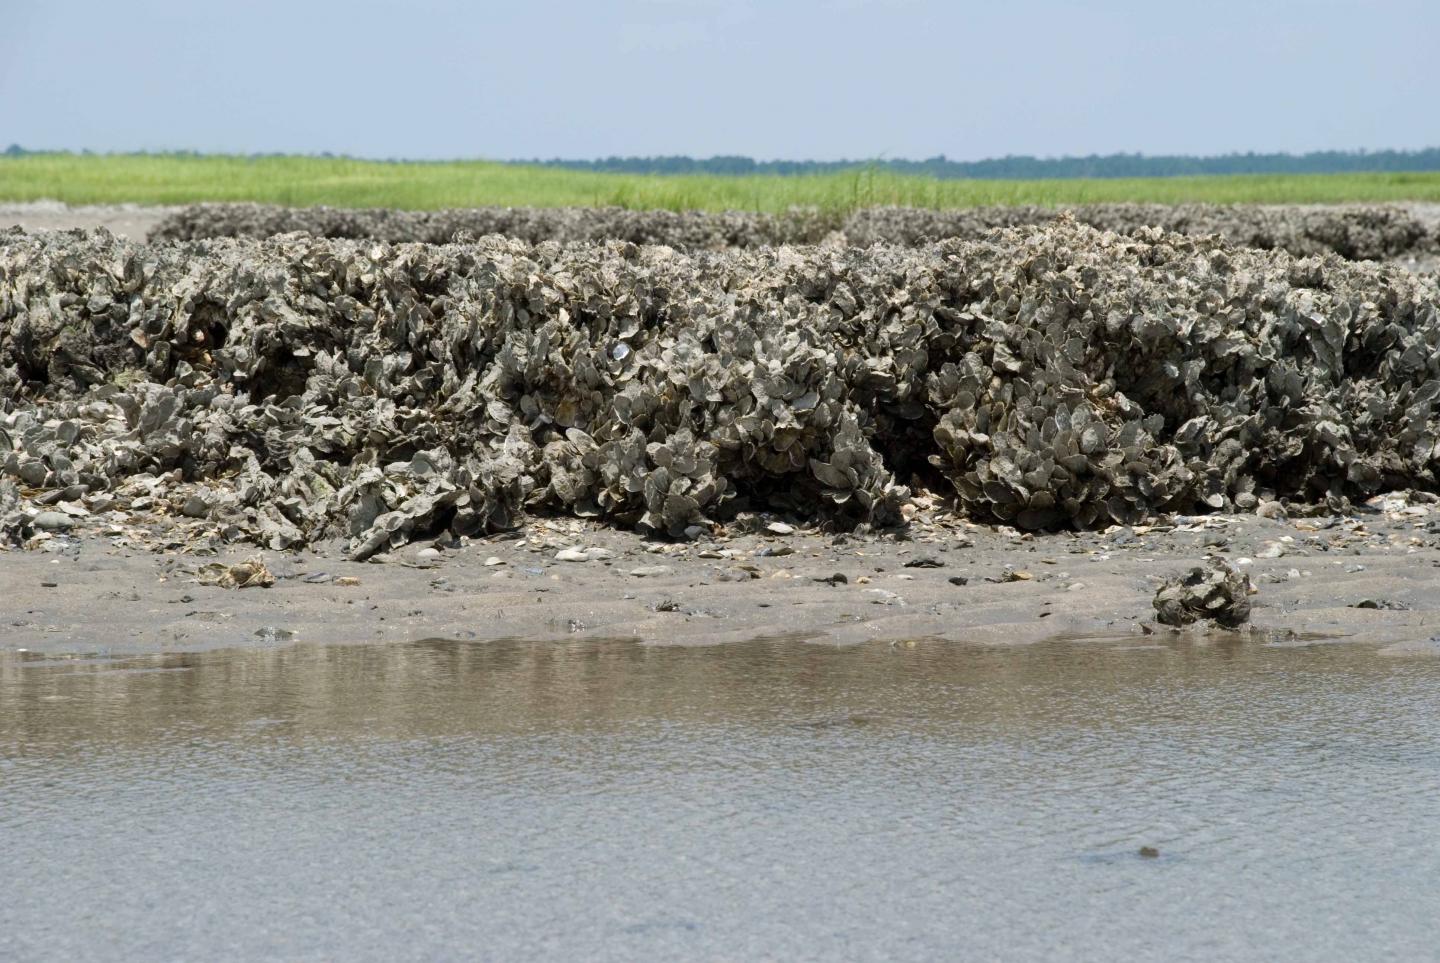 Mussels Cement themselves to One Another on the Coast of South Carolina